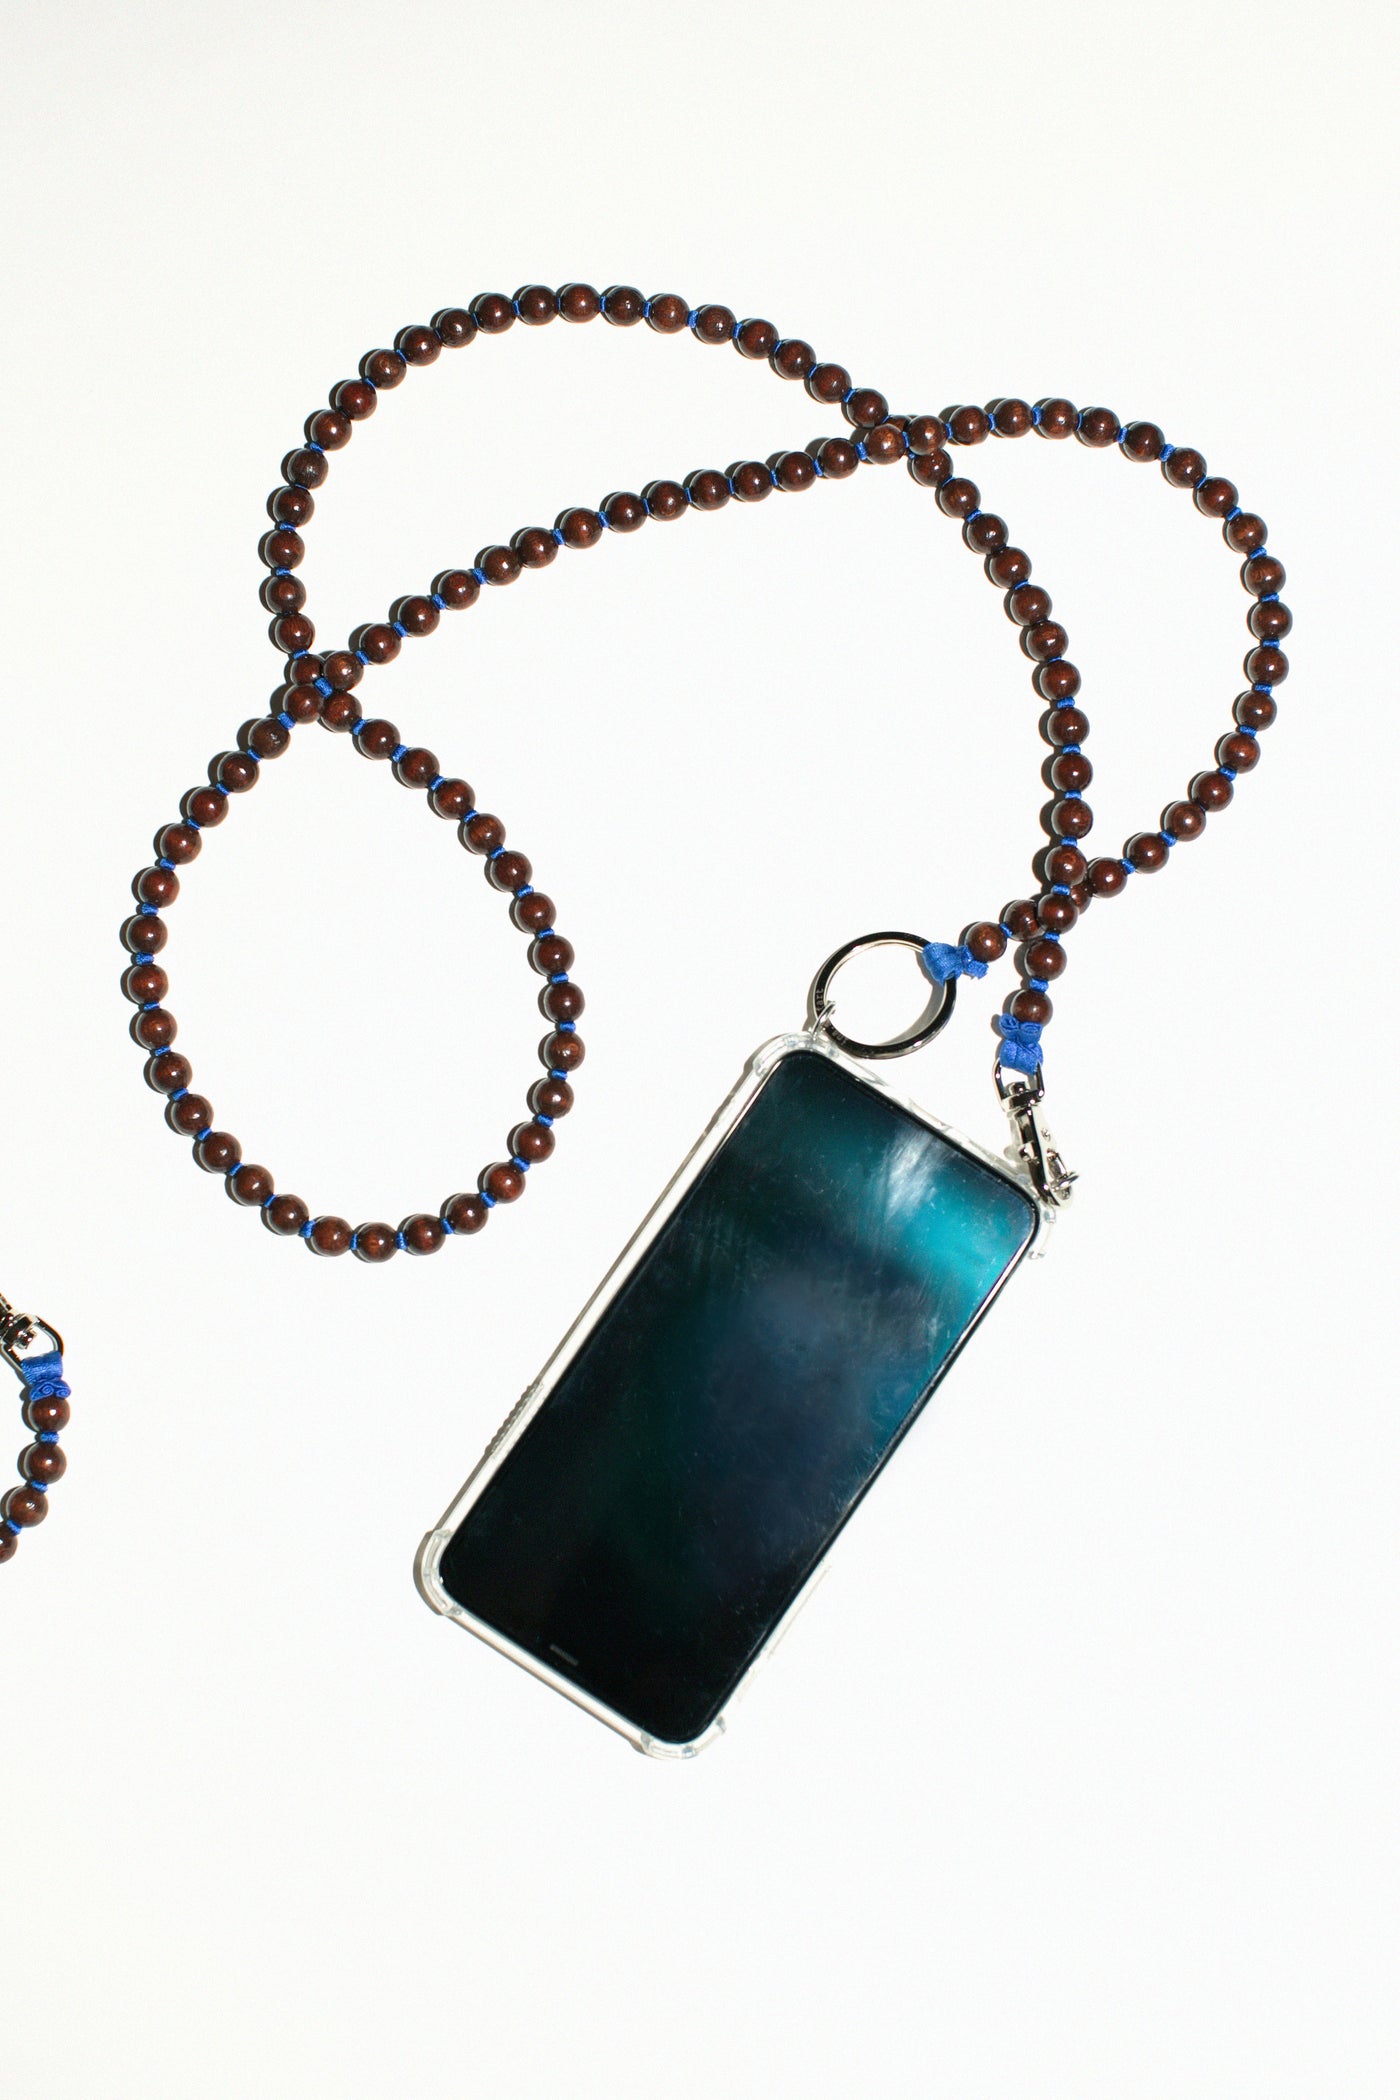 Brown Bead with Blue Thread Handykette Iphone Necklace